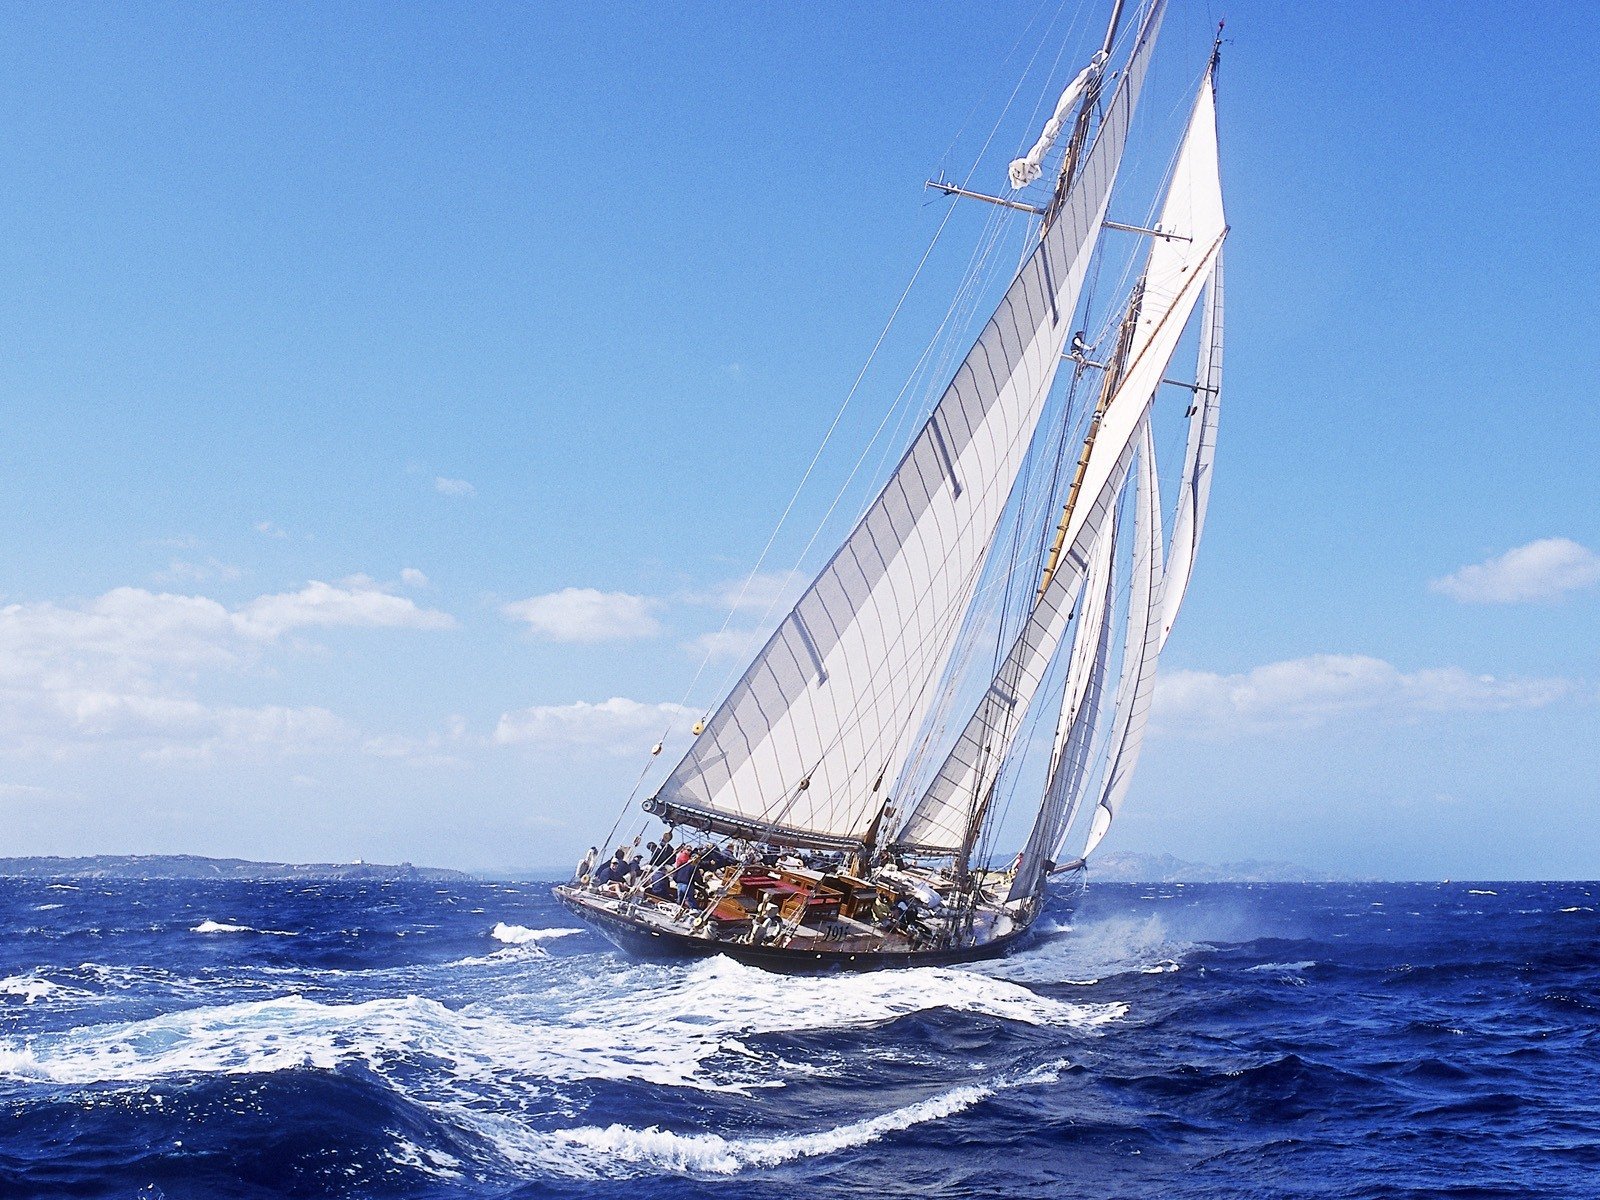 Sailing Wallpaper With ship through the ocean HD Wallpapers 1600x1200